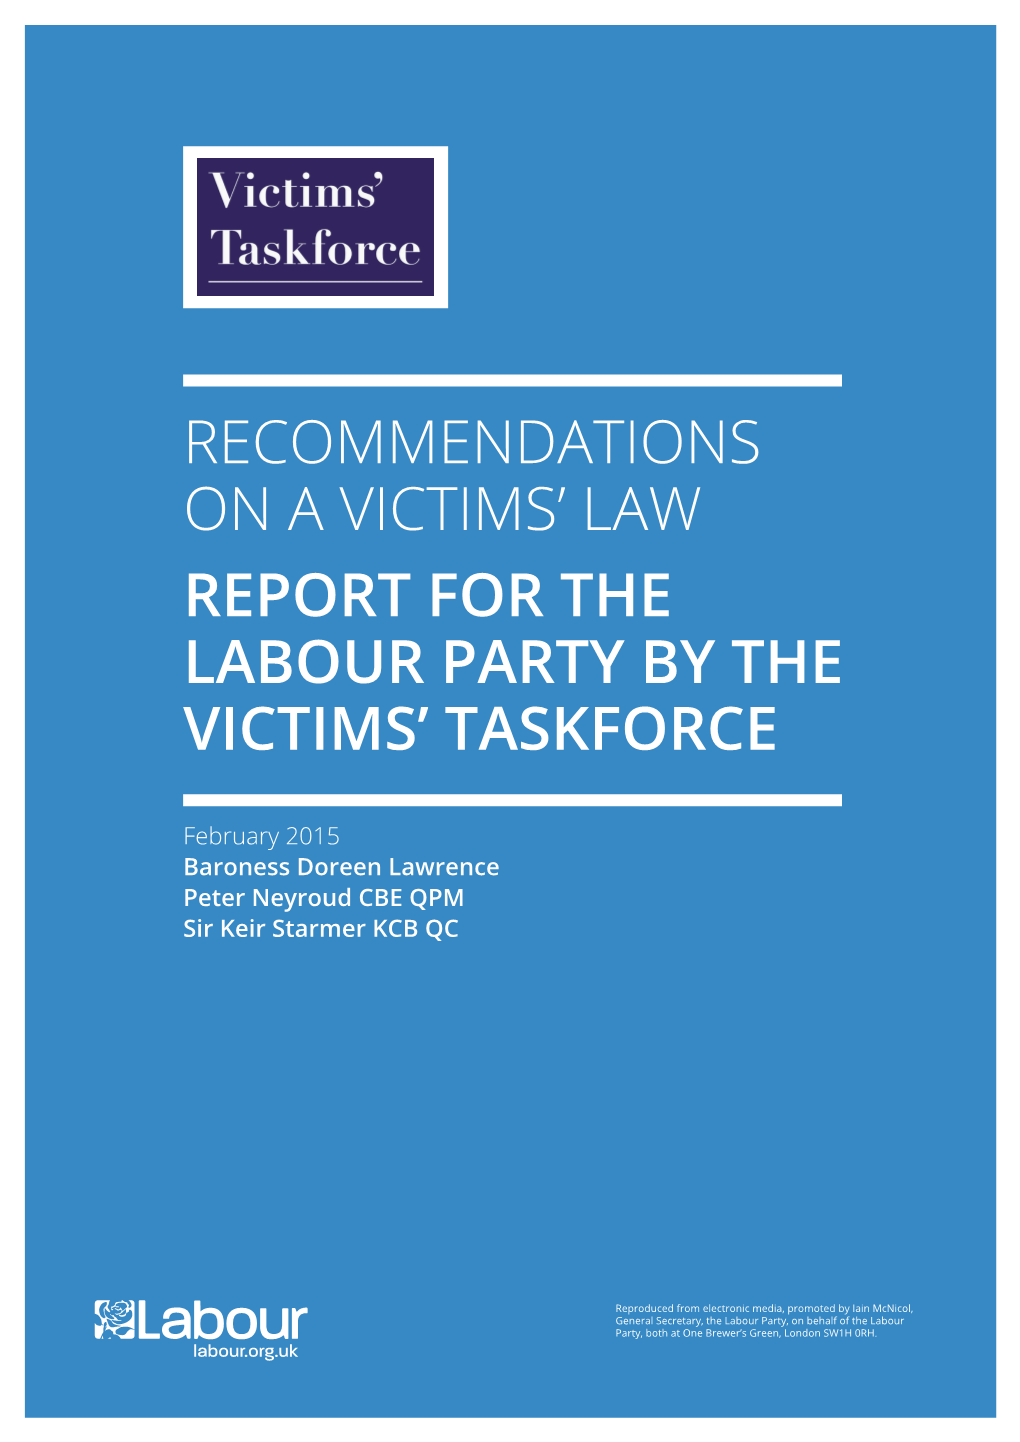 Recommendations on a Victims' Law Report for the Labour Party by The